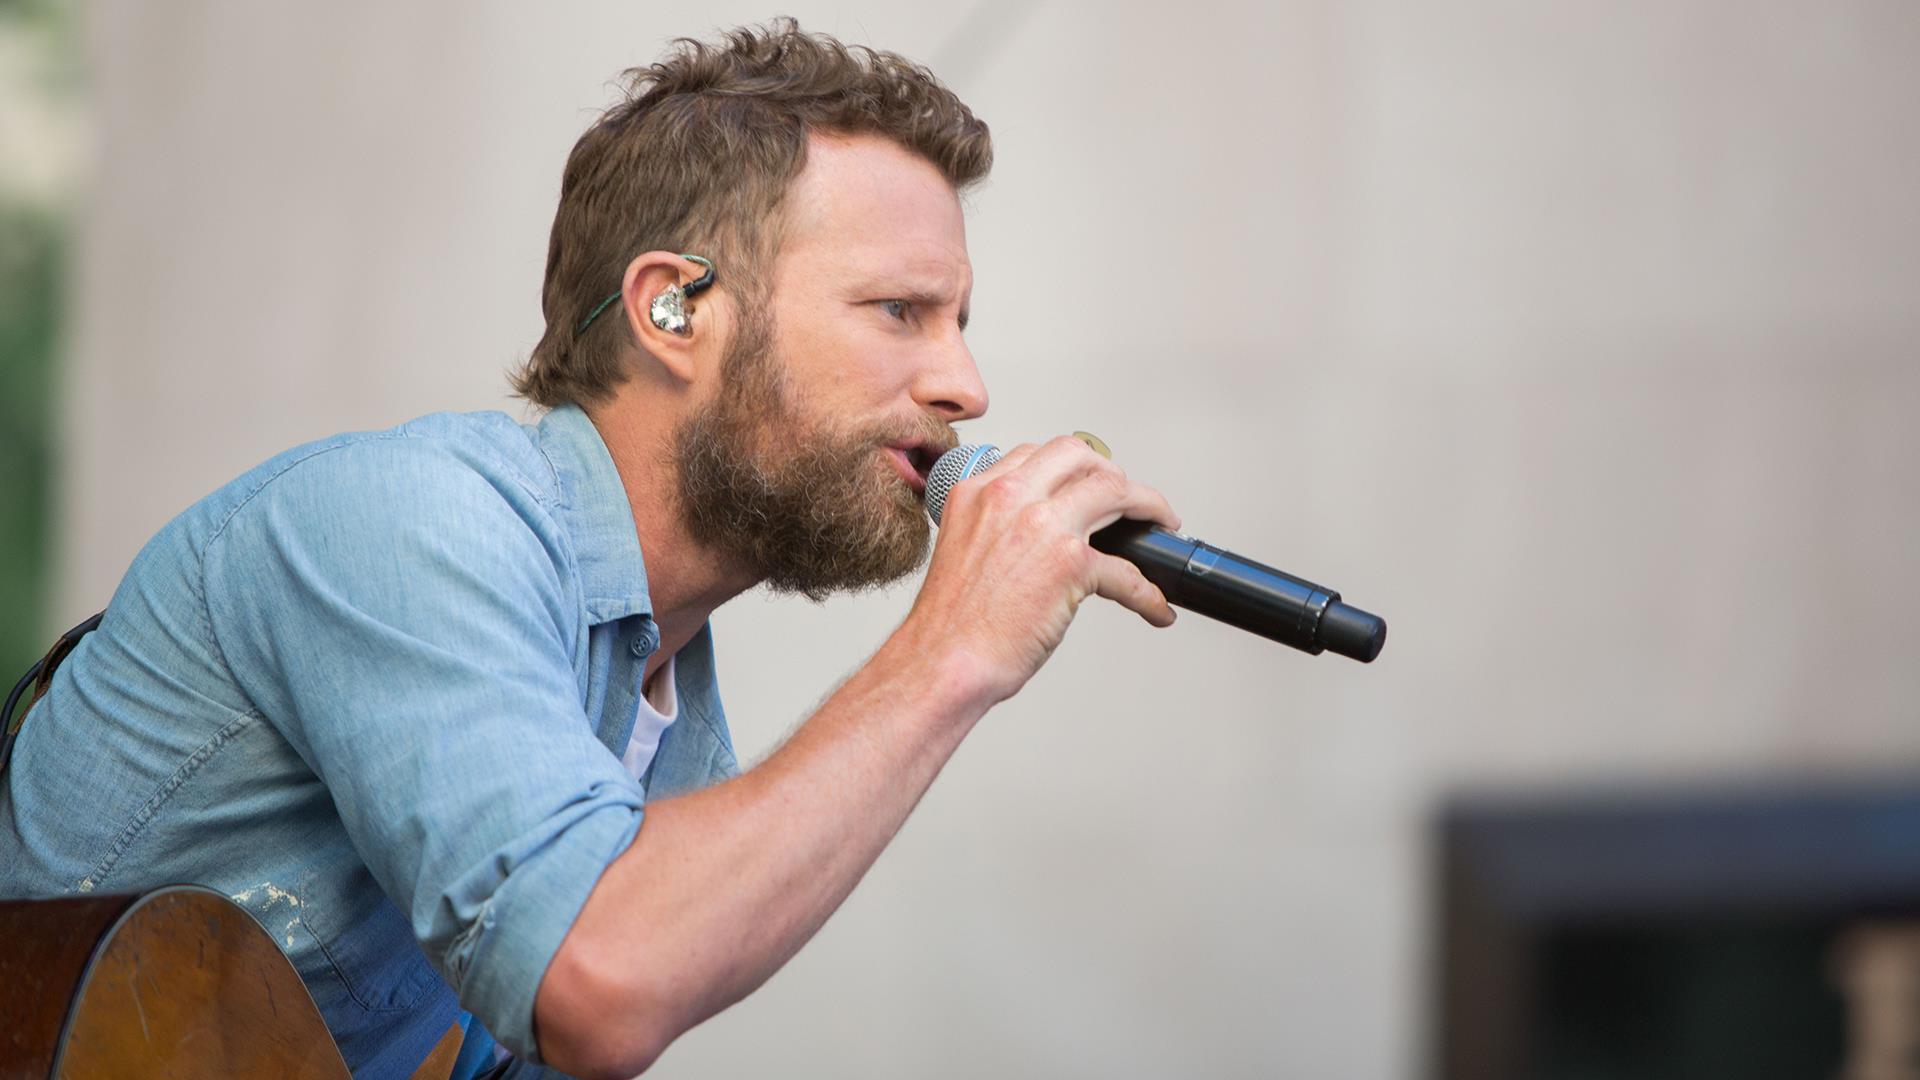 Dierks Bentley sings ‘Somewhere on a Beach’ live on the TODAY plaza